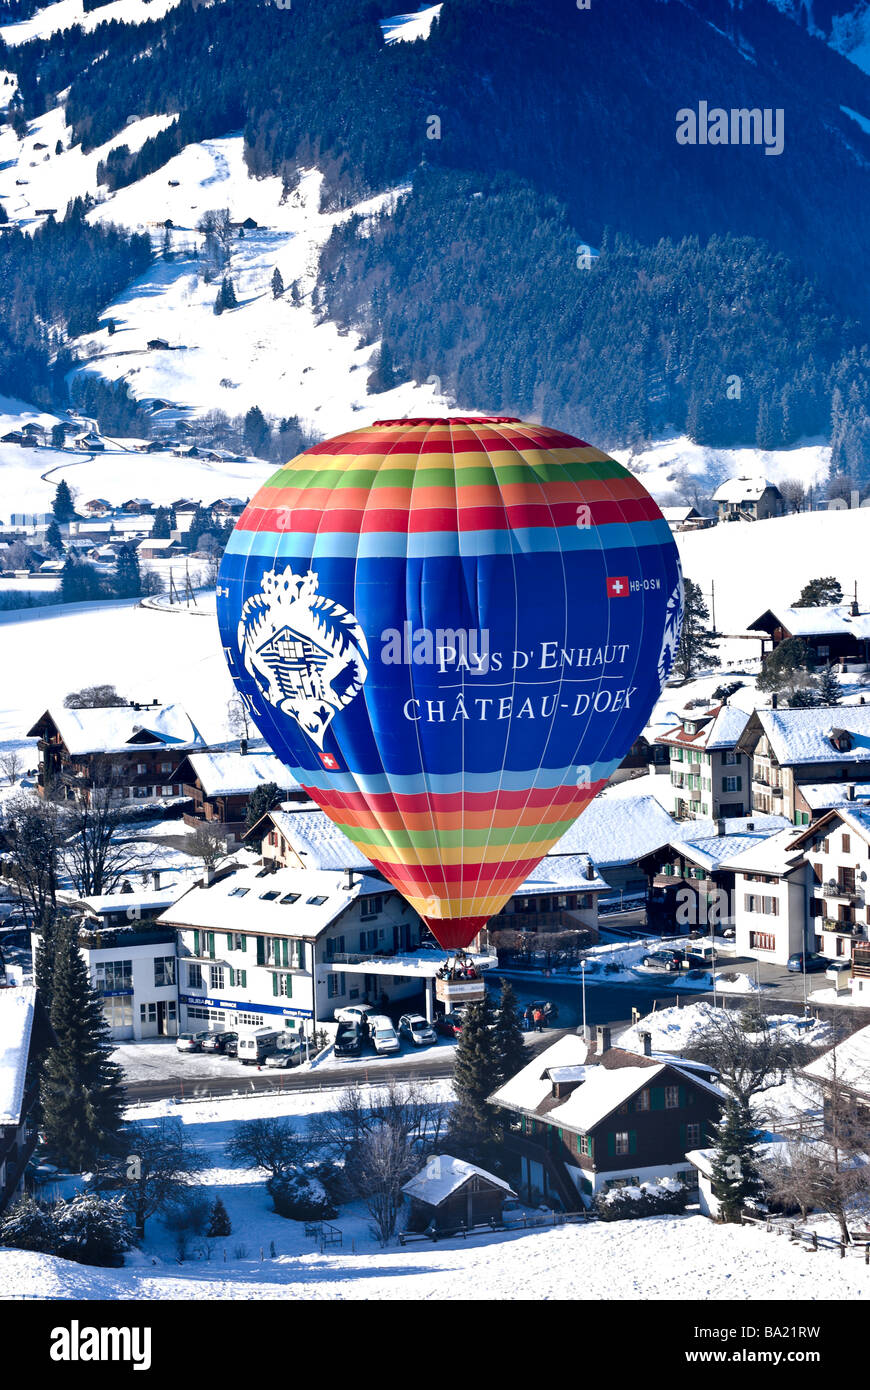 Chateau d'Oex balloon floats above the village at the 2009 International Hot Air Balloon festival, Switzerland. Charles Lupica Stock Photo